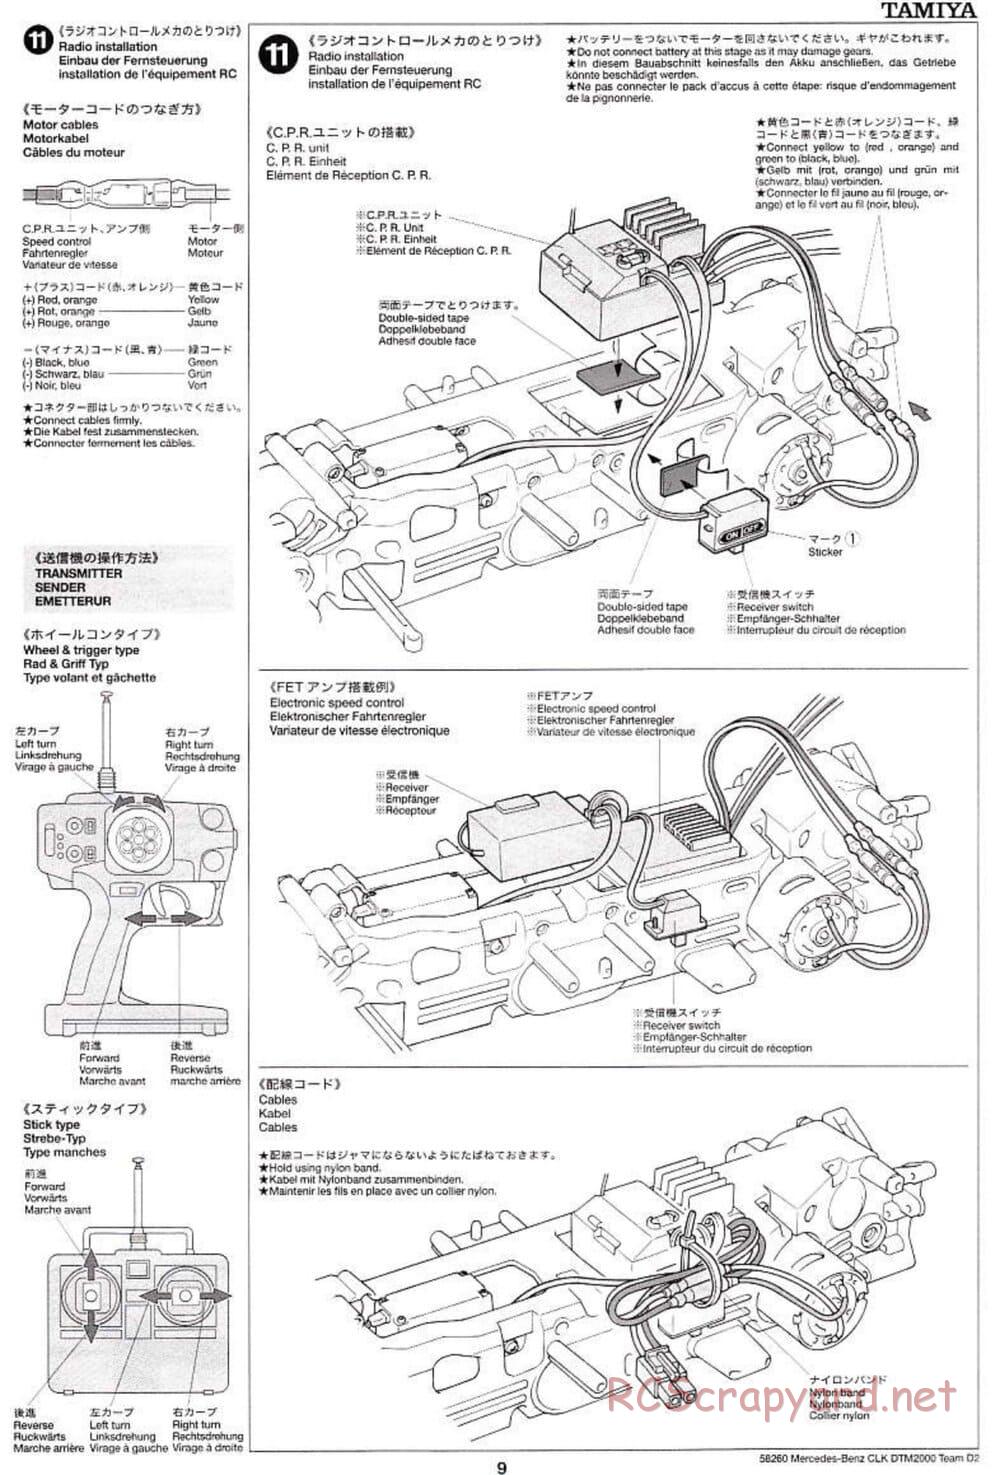 Tamiya - Mercedes Benz CLK DTM 2000 Team D2 - TL-01 Chassis - Manual - Page 9